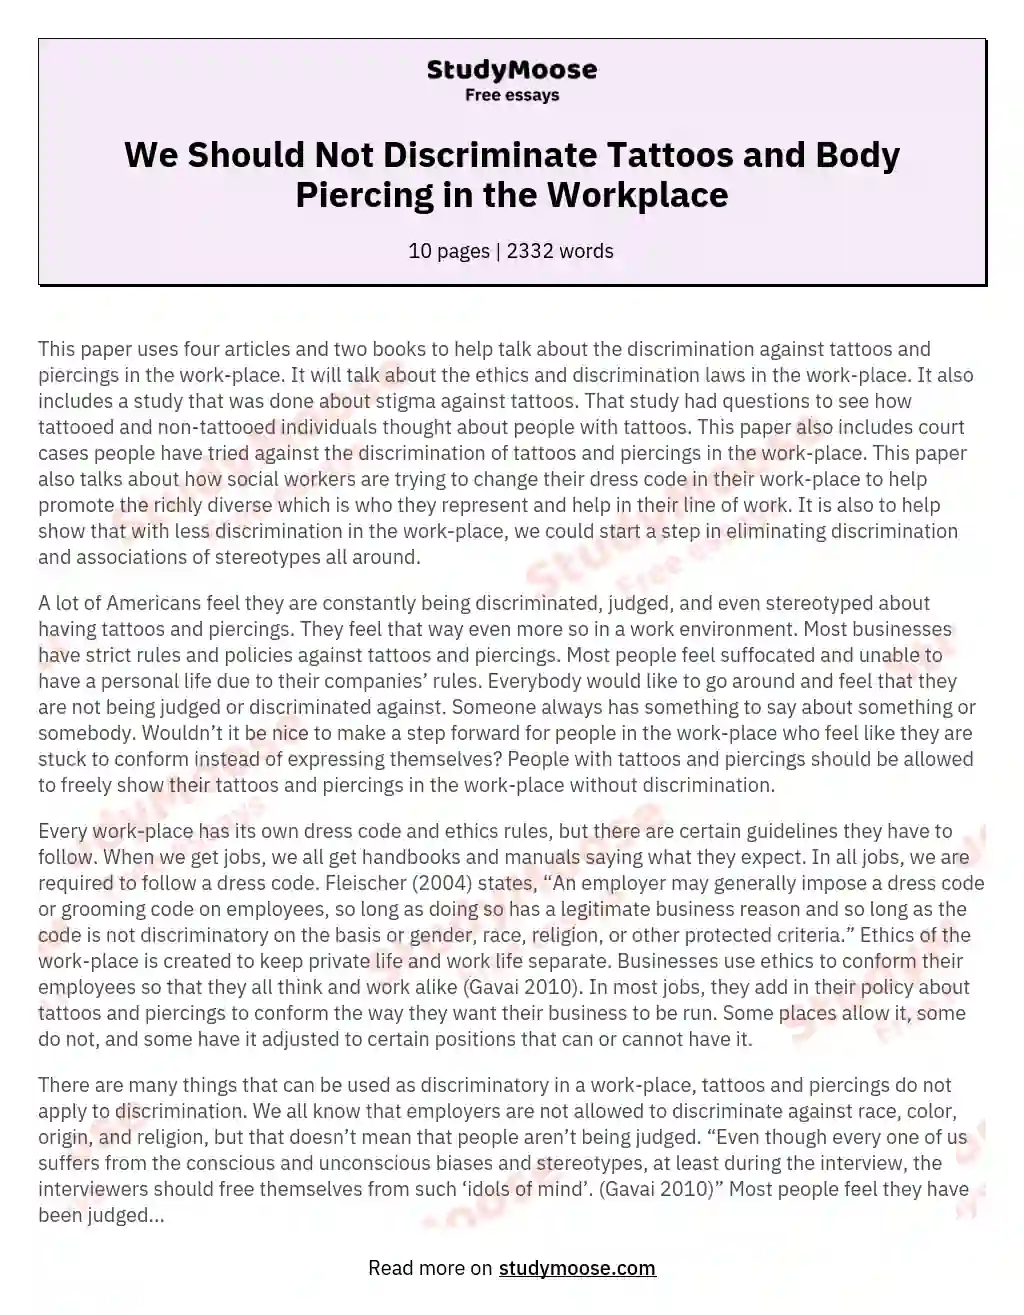 We Should Not Discriminate Tattoos and Body Piercing in the Workplace Free  Essay Example